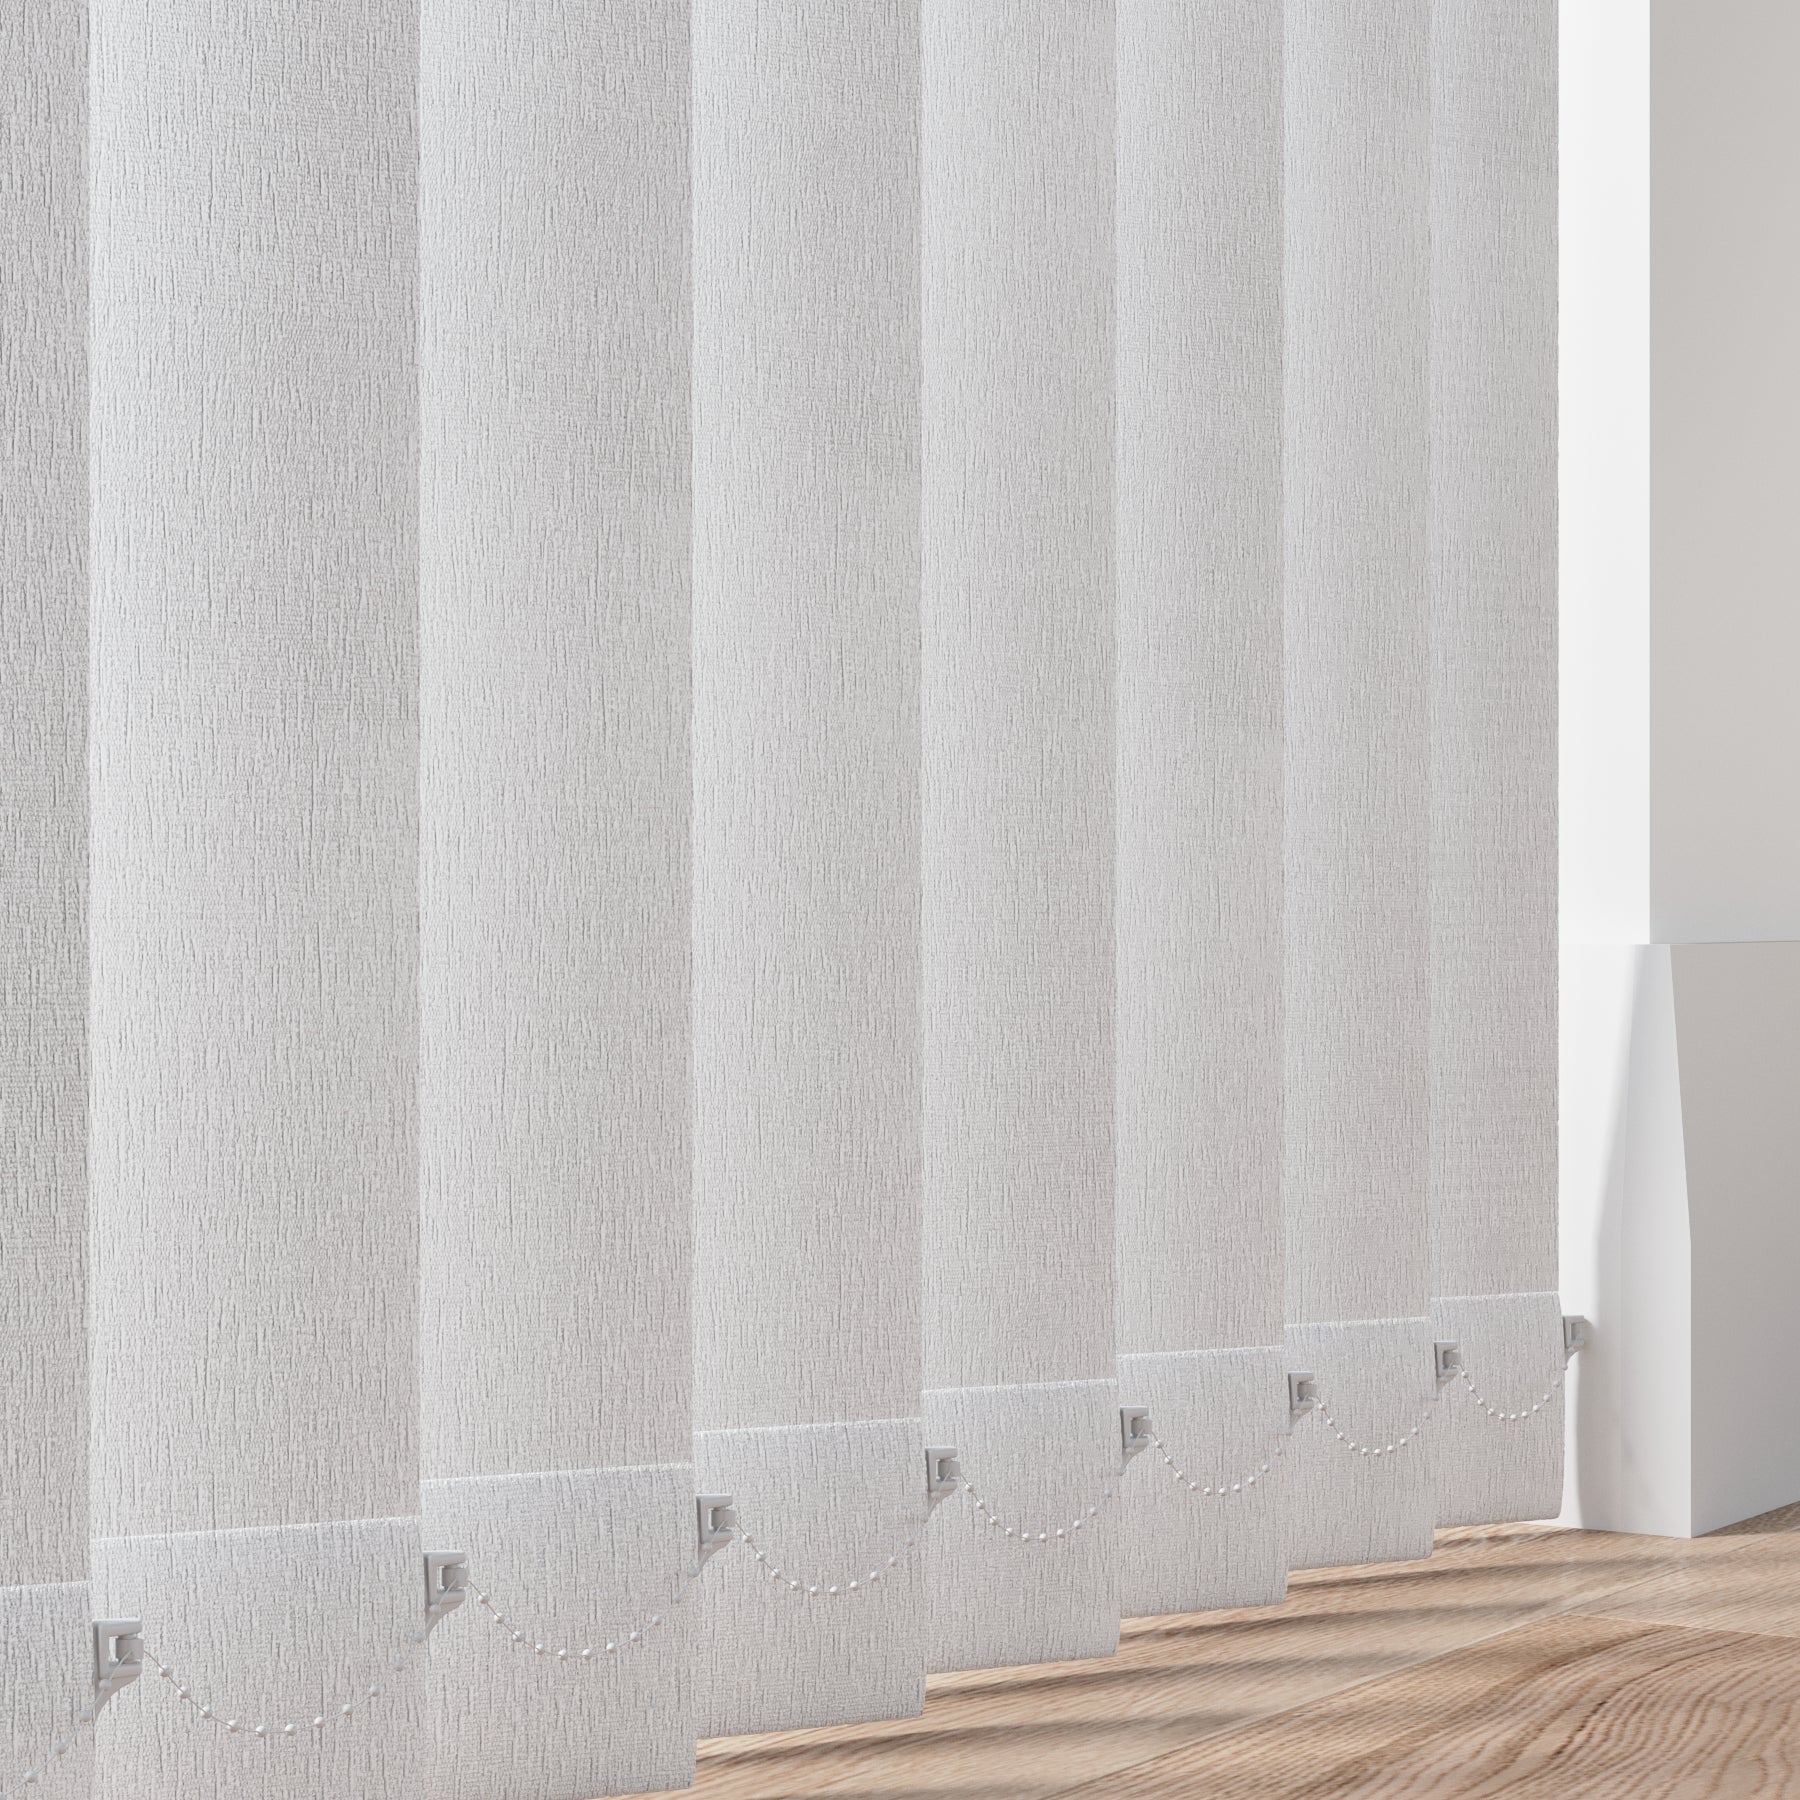 Cloud White - Vertical Blinds